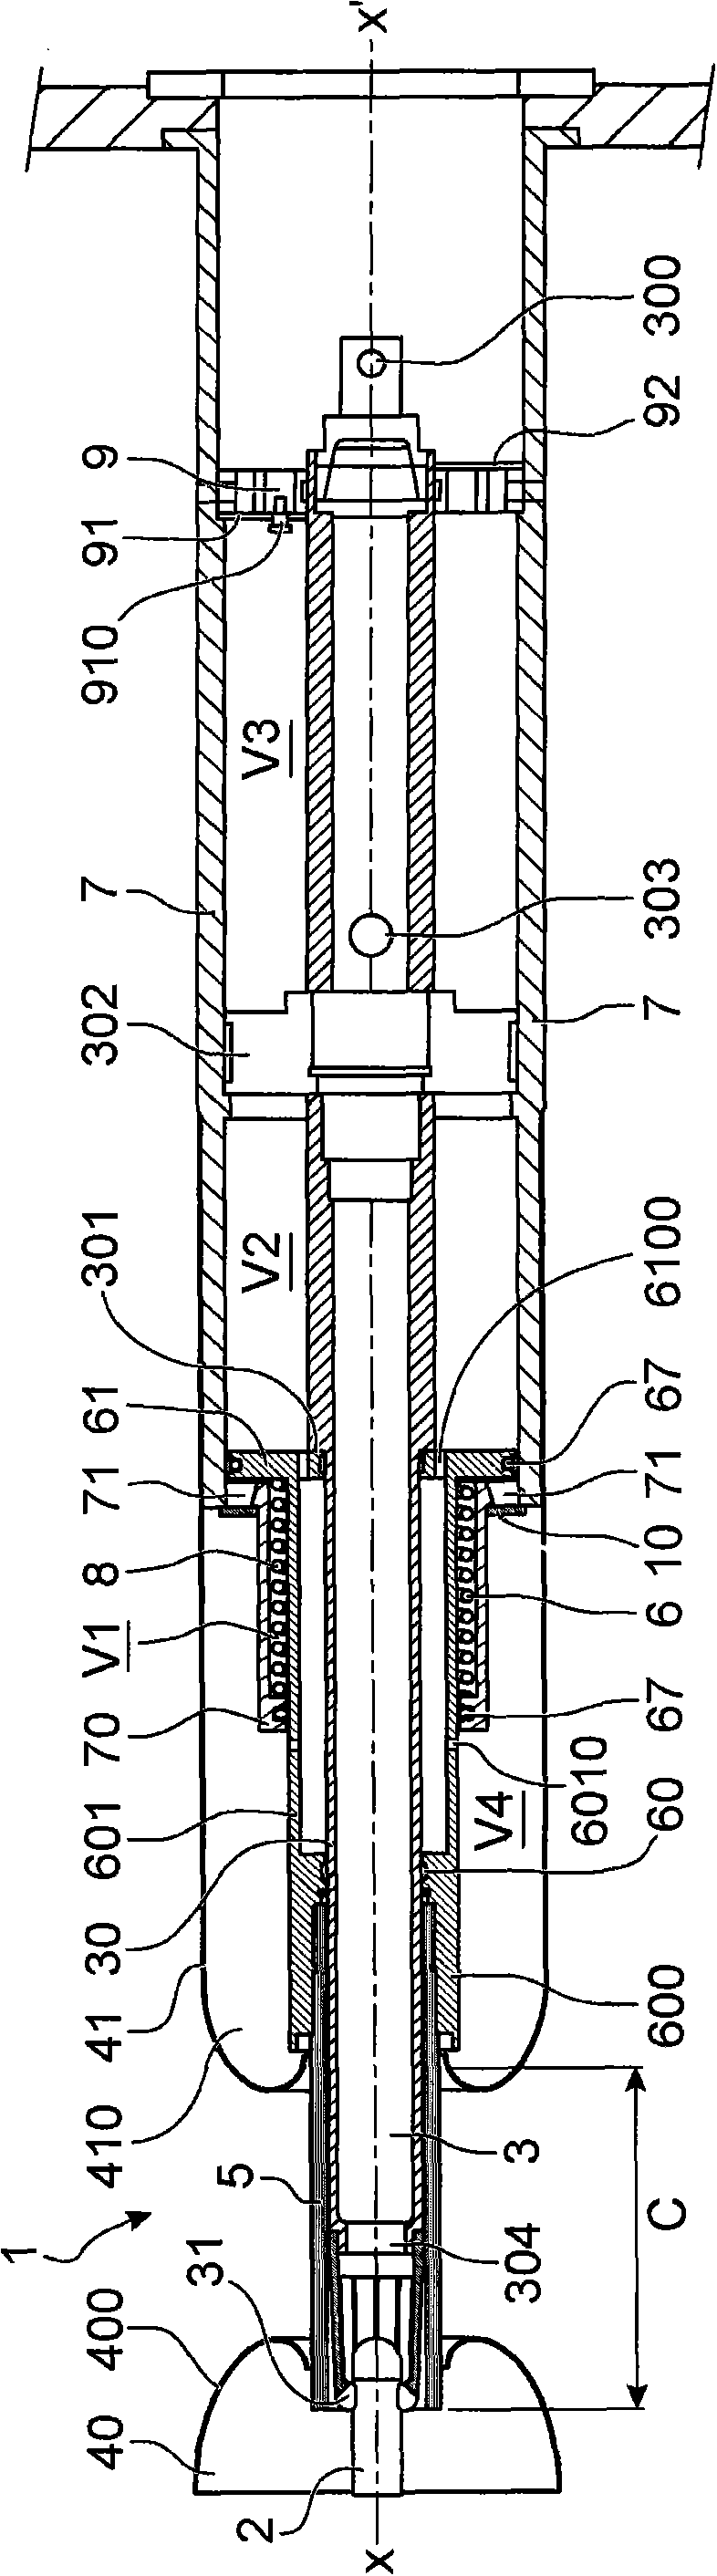 Interruptor chamber, HVDC bypass interrupter and high voltage direct current converting plant comprising such chamber